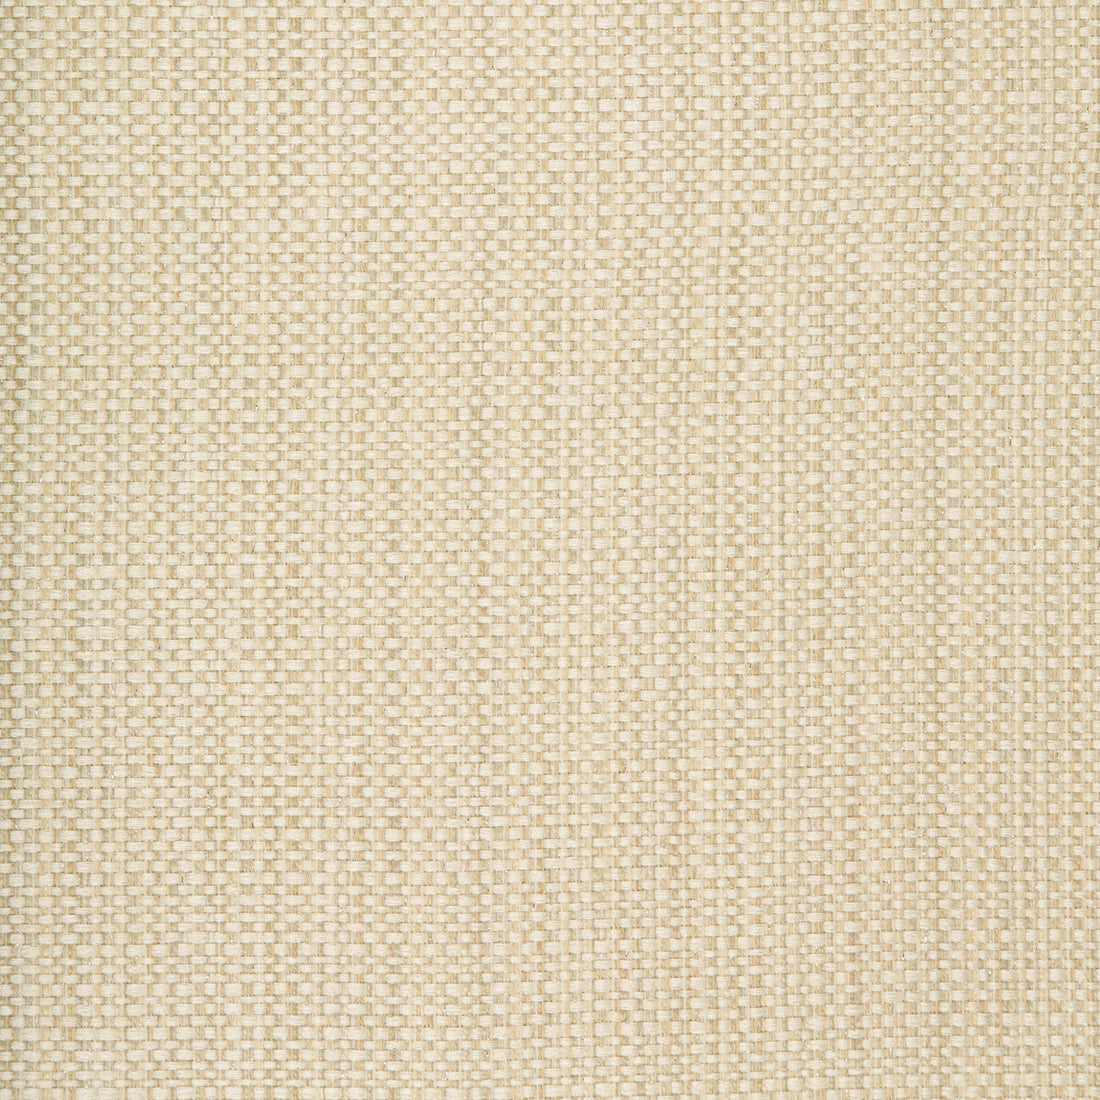 Kravet Design fabric in 34683-116 color - pattern 34683.116.0 - by Kravet Design in the Performance Crypton Home collection